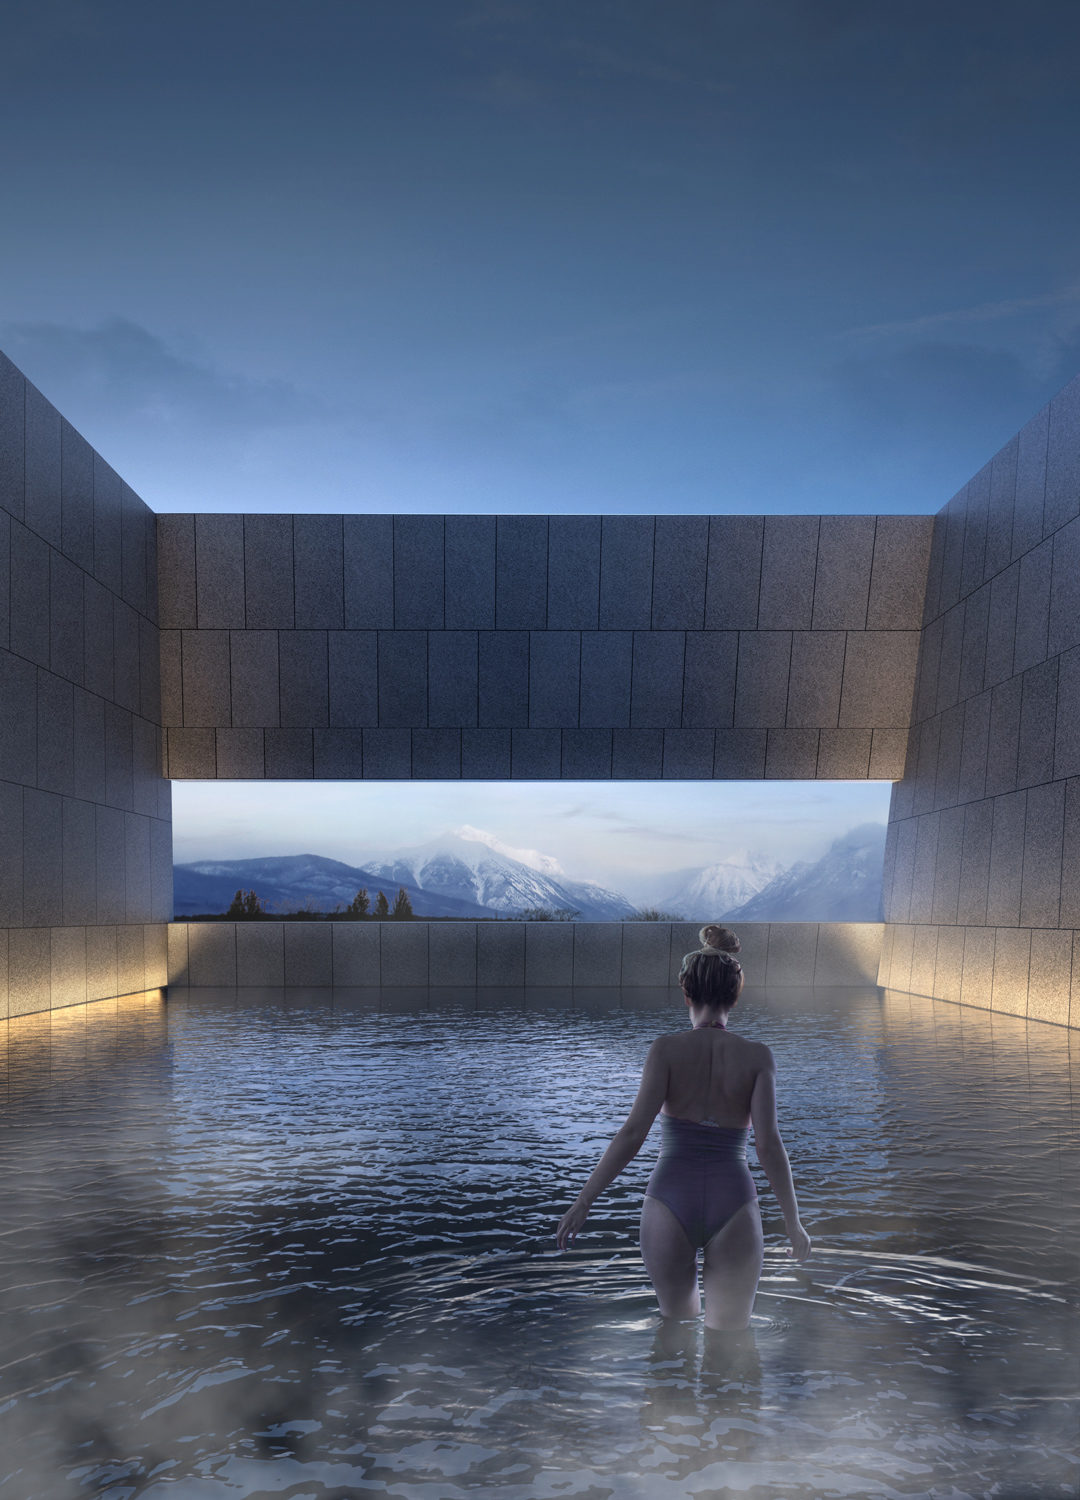 New thermae in Ponte di Legno – ARW Architectural Research Workshop, 2017